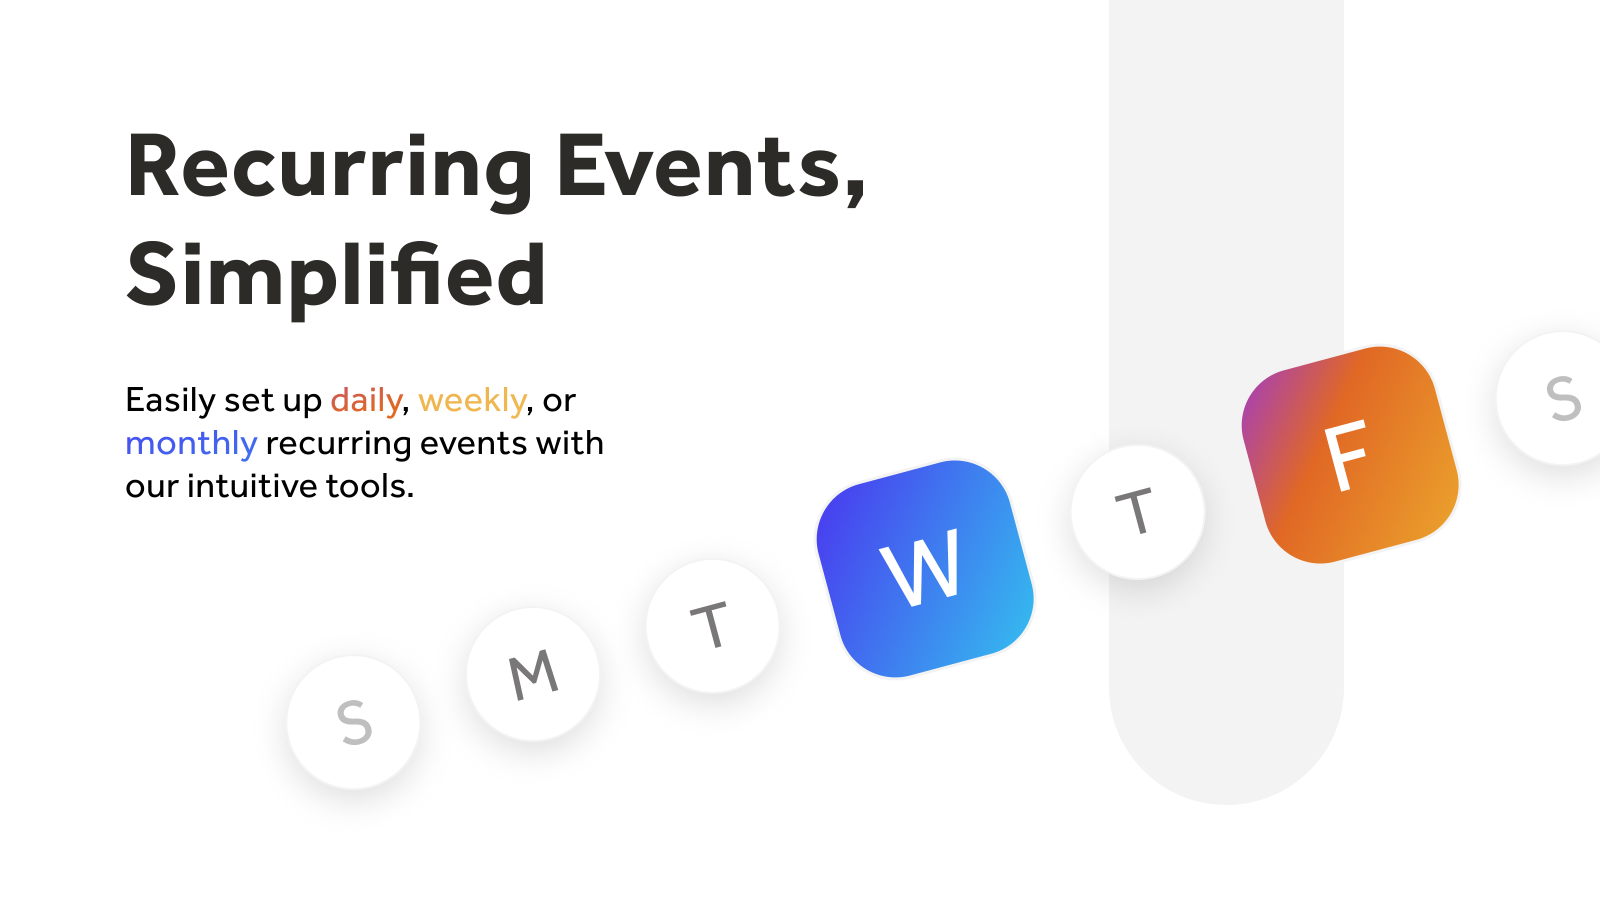 Recurring Events. Simplified.